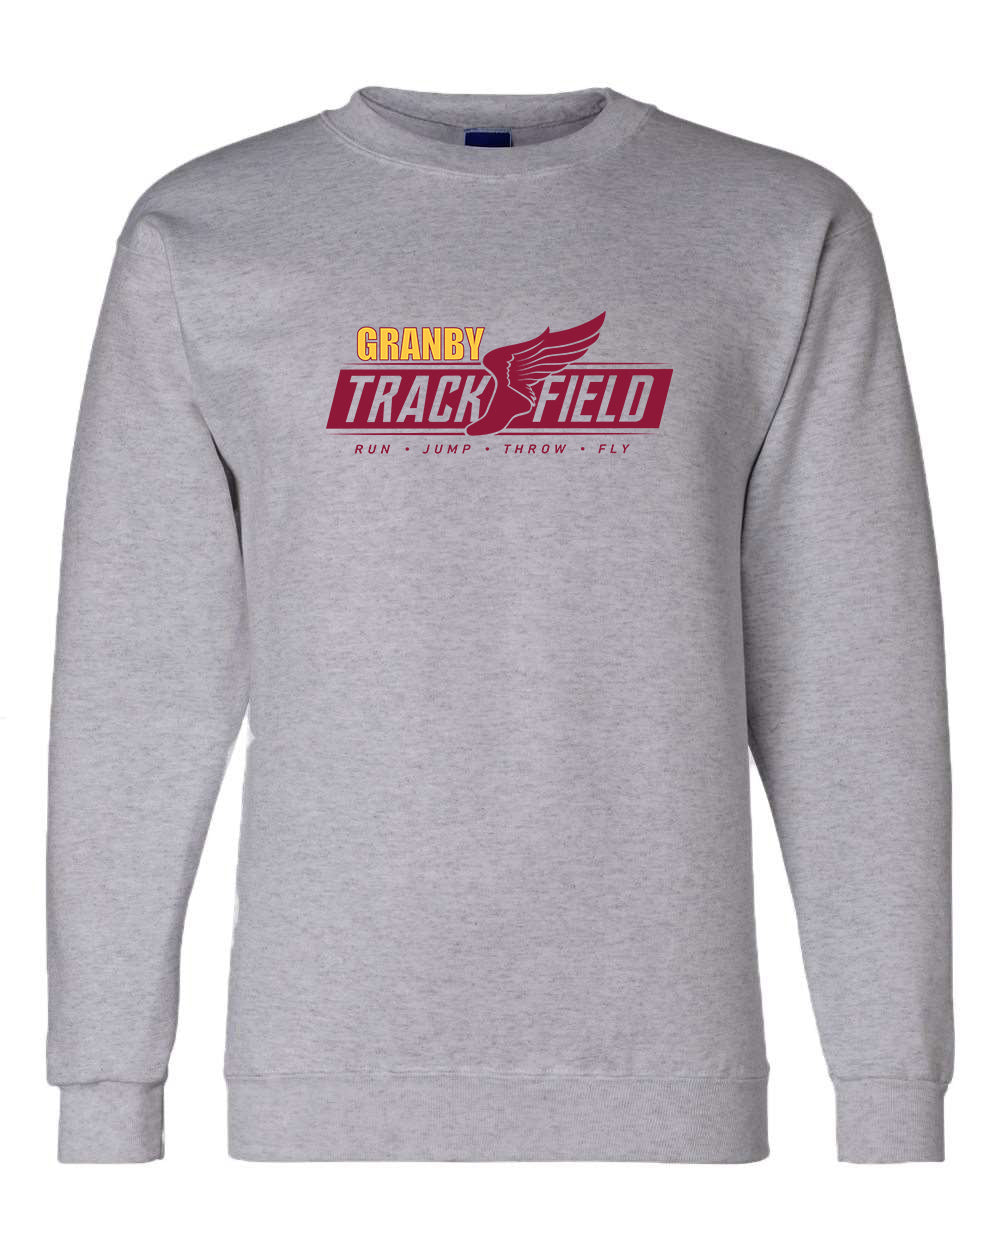 Granby High T&F Adult Champion Crew neck - S600 (color options available)